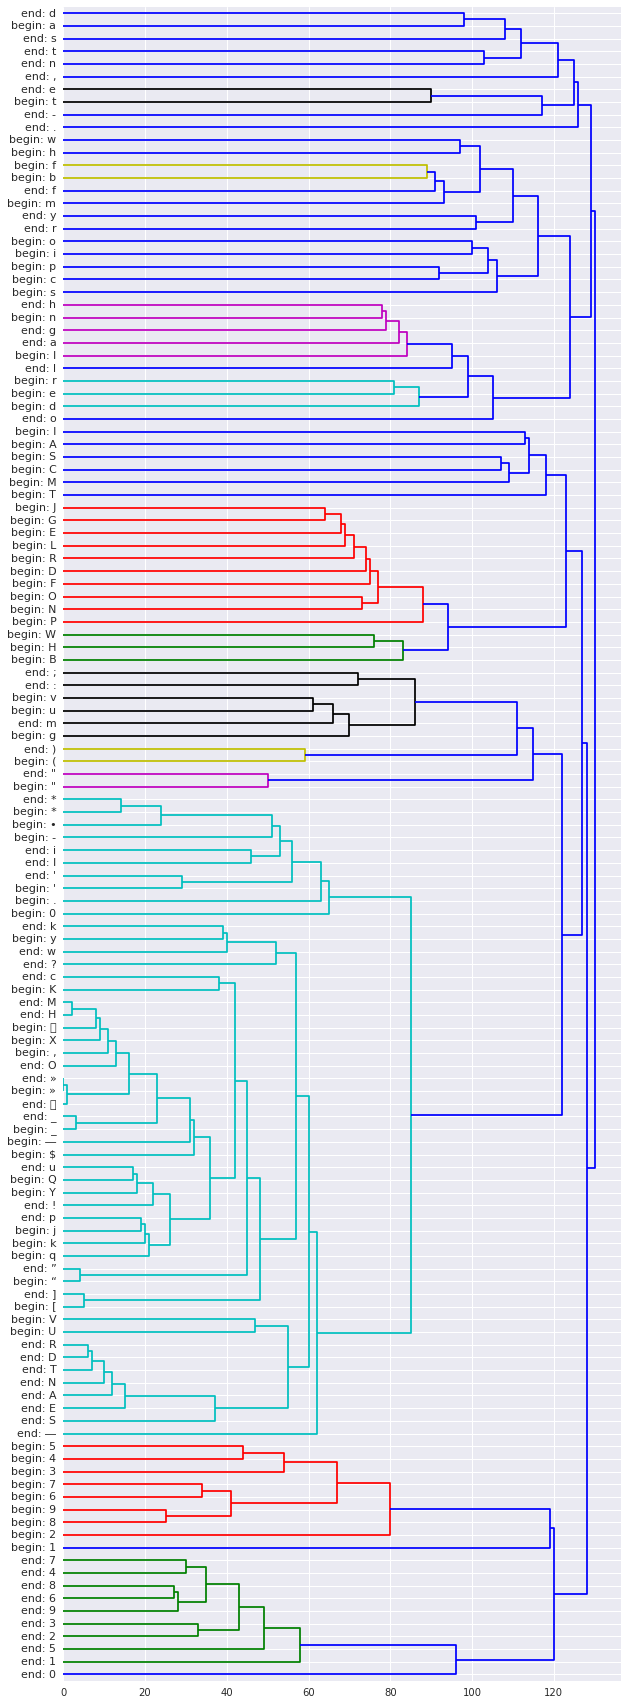 feature-dendrogram.png